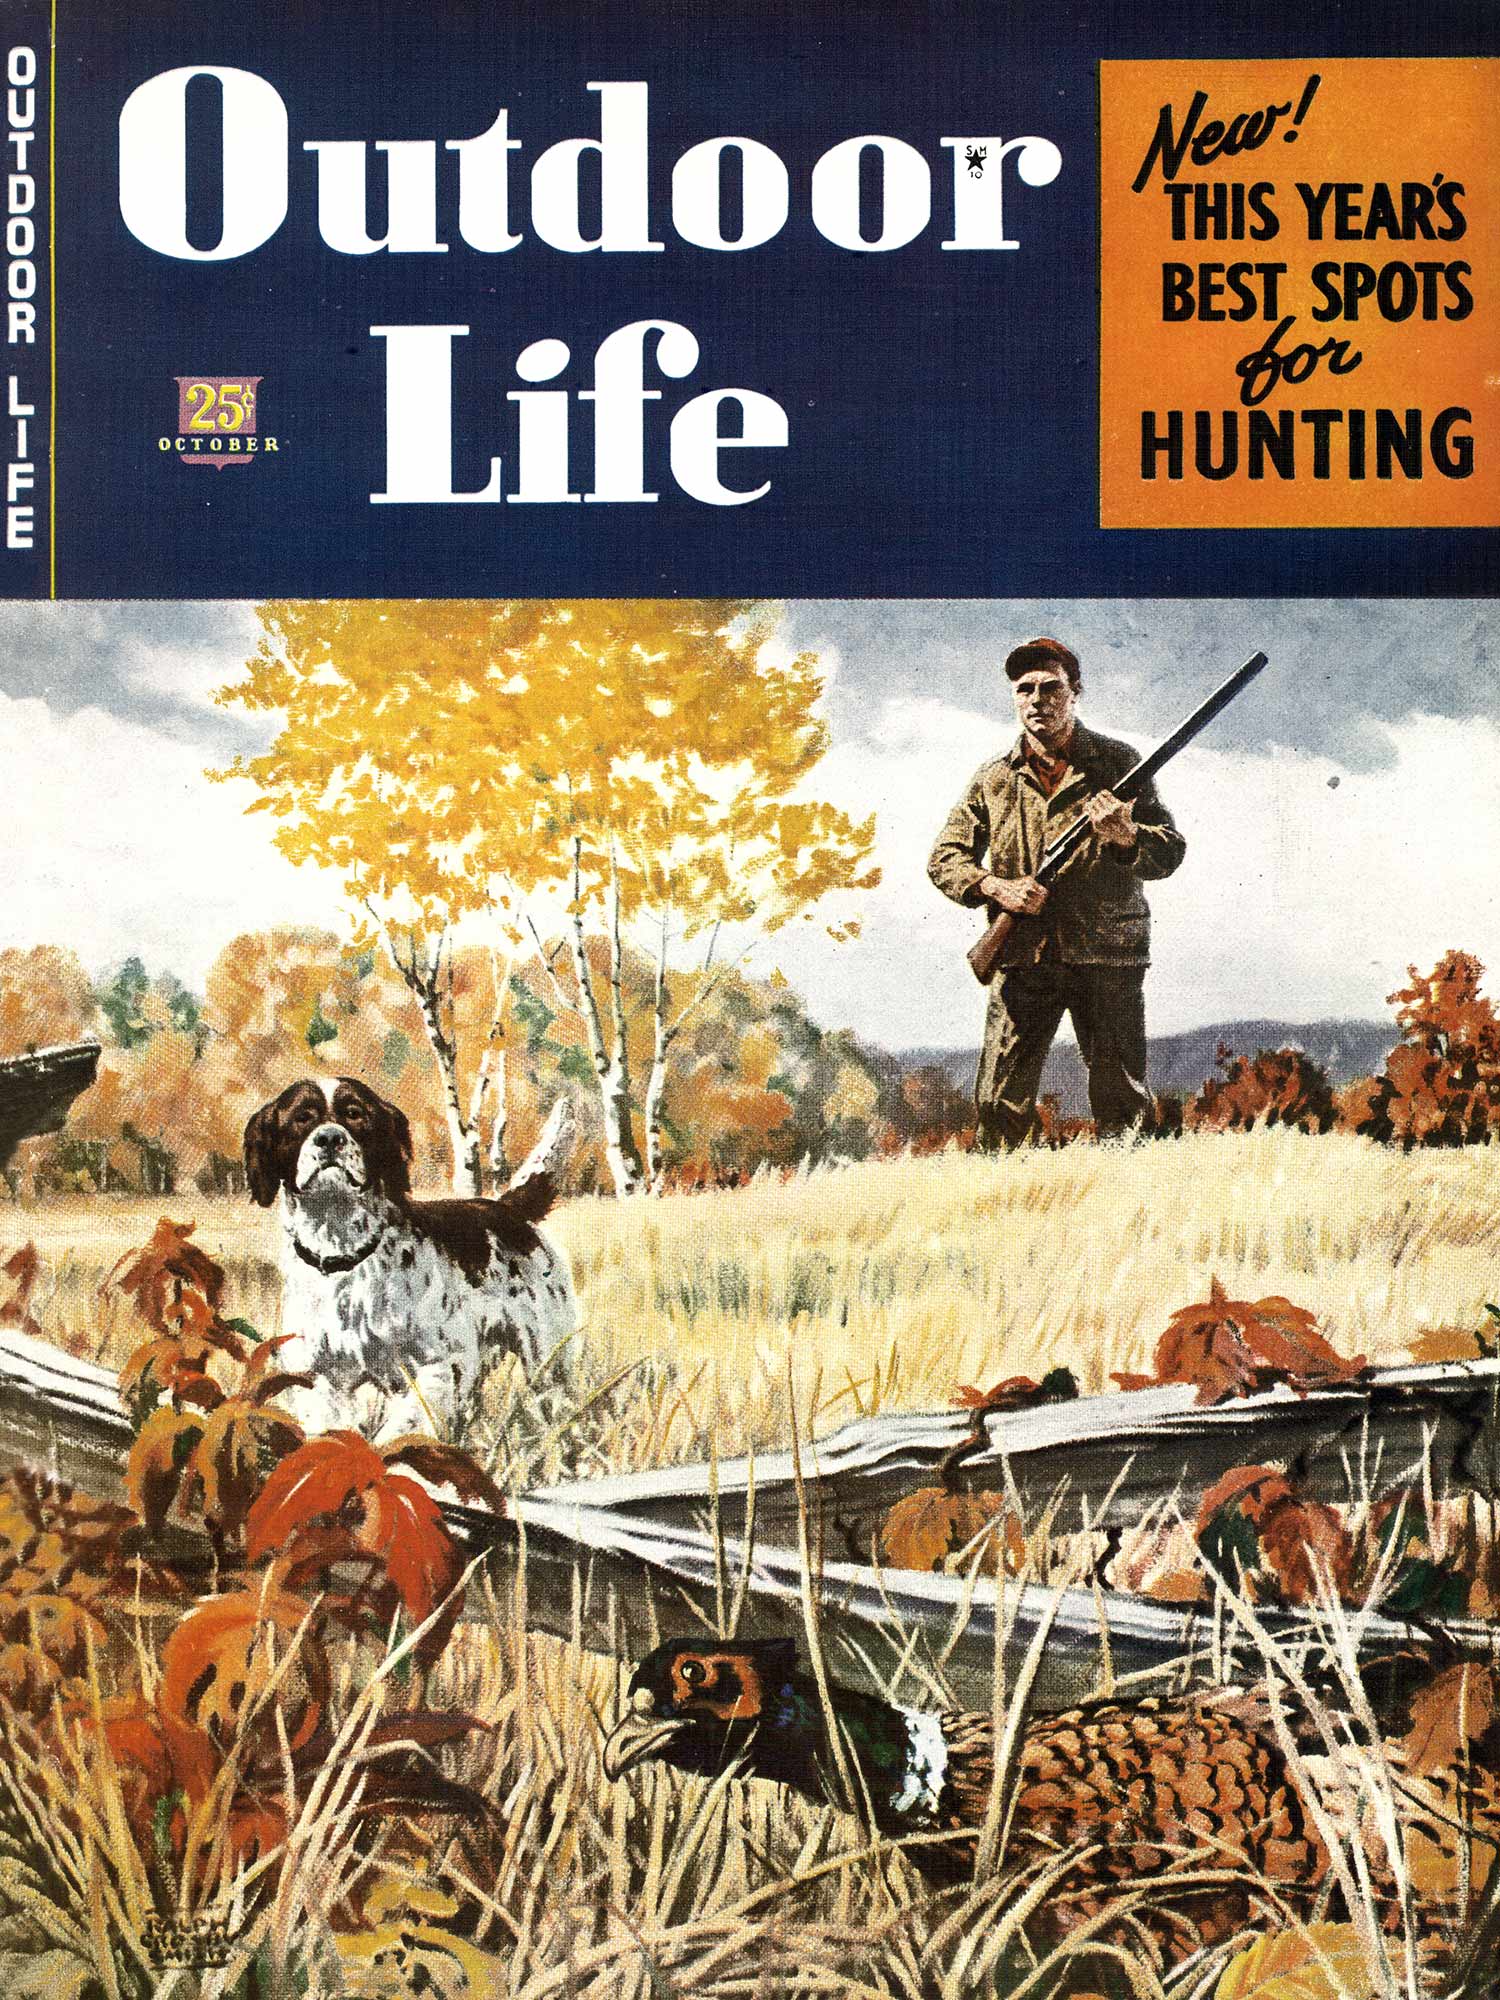 October 1946 cover of Outdoor Life shows a hunter, a setter, and a pheasant